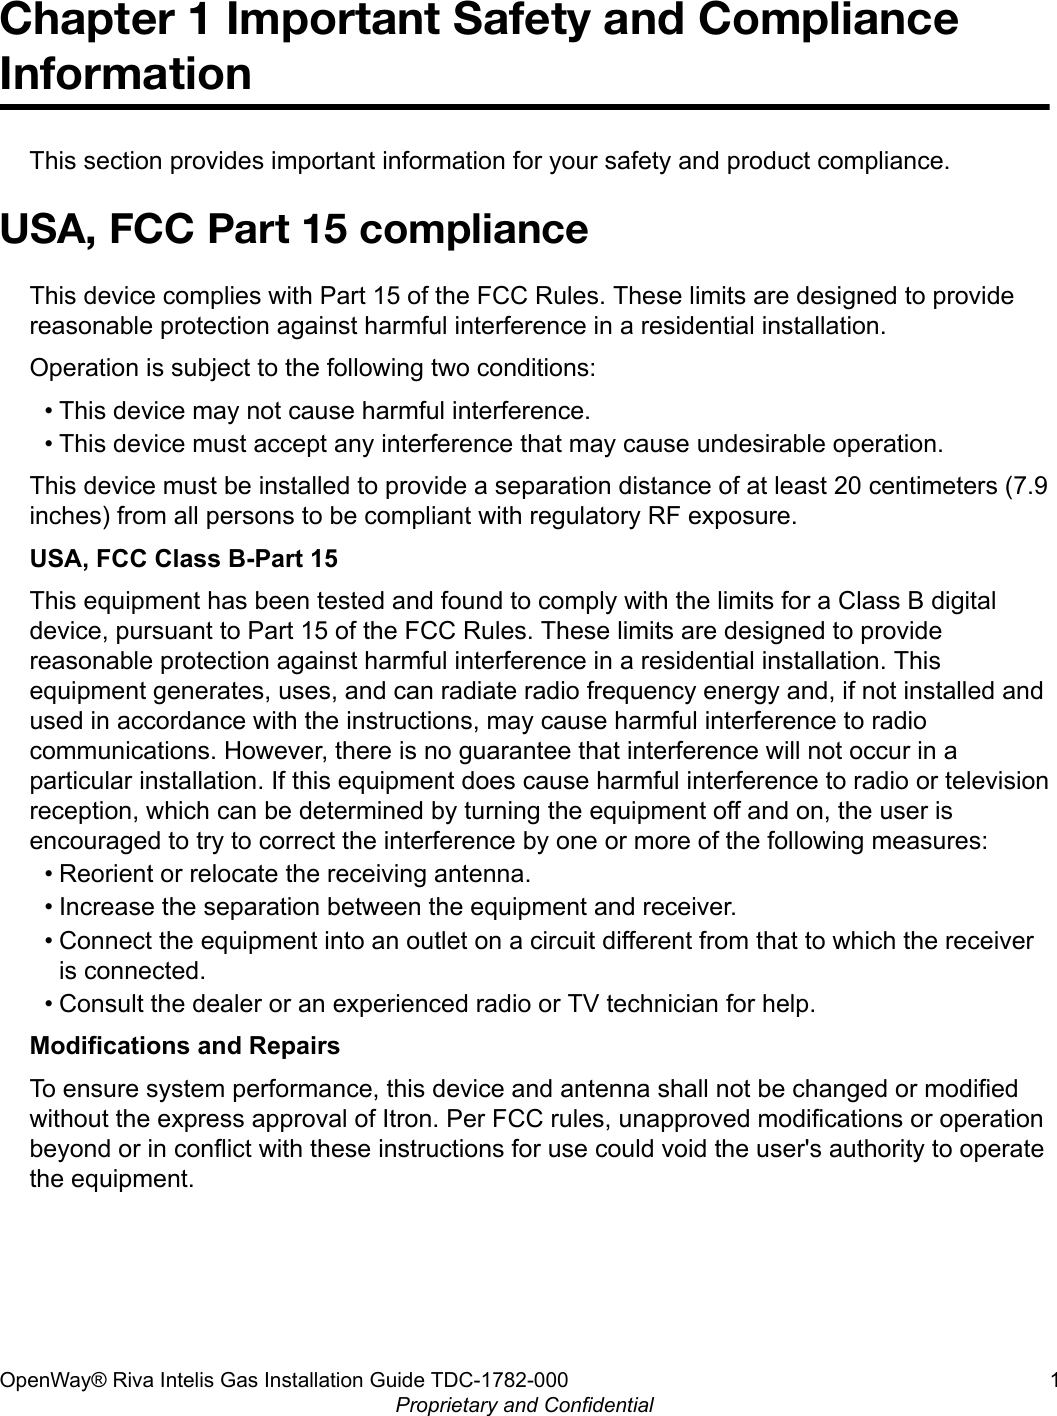 Chapter 1 Important Safety and ComplianceInformationThis section provides important information for your safety and product compliance.USA, FCC Part 15 complianceThis device complies with Part 15 of the FCC Rules. These limits are designed to providereasonable protection against harmful interference in a residential installation.Operation is subject to the following two conditions:• This device may not cause harmful interference.• This device must accept any interference that may cause undesirable operation.This device must be installed to provide a separation distance of at least 20 centimeters (7.9inches) from all persons to be compliant with regulatory RF exposure.USA, FCC Class B-Part 15This equipment has been tested and found to comply with the limits for a Class B digitaldevice, pursuant to Part 15 of the FCC Rules. These limits are designed to providereasonable protection against harmful interference in a residential installation. Thisequipment generates, uses, and can radiate radio frequency energy and, if not installed andused in accordance with the instructions, may cause harmful interference to radiocommunications. However, there is no guarantee that interference will not occur in aparticular installation. If this equipment does cause harmful interference to radio or televisionreception, which can be determined by turning the equipment off and on, the user isencouraged to try to correct the interference by one or more of the following measures:• Reorient or relocate the receiving antenna.• Increase the separation between the equipment and receiver.• Connect the equipment into an outlet on a circuit different from that to which the receiveris connected.• Consult the dealer or an experienced radio or TV technician for help.Modifications and RepairsTo ensure system performance, this device and antenna shall not be changed or modifiedwithout the express approval of Itron. Per FCC rules, unapproved modifications or operationbeyond or in conflict with these instructions for use could void the user&apos;s authority to operatethe equipment.OpenWay® Riva Intelis Gas Installation Guide TDC-1782-000 1Proprietary and Confidential